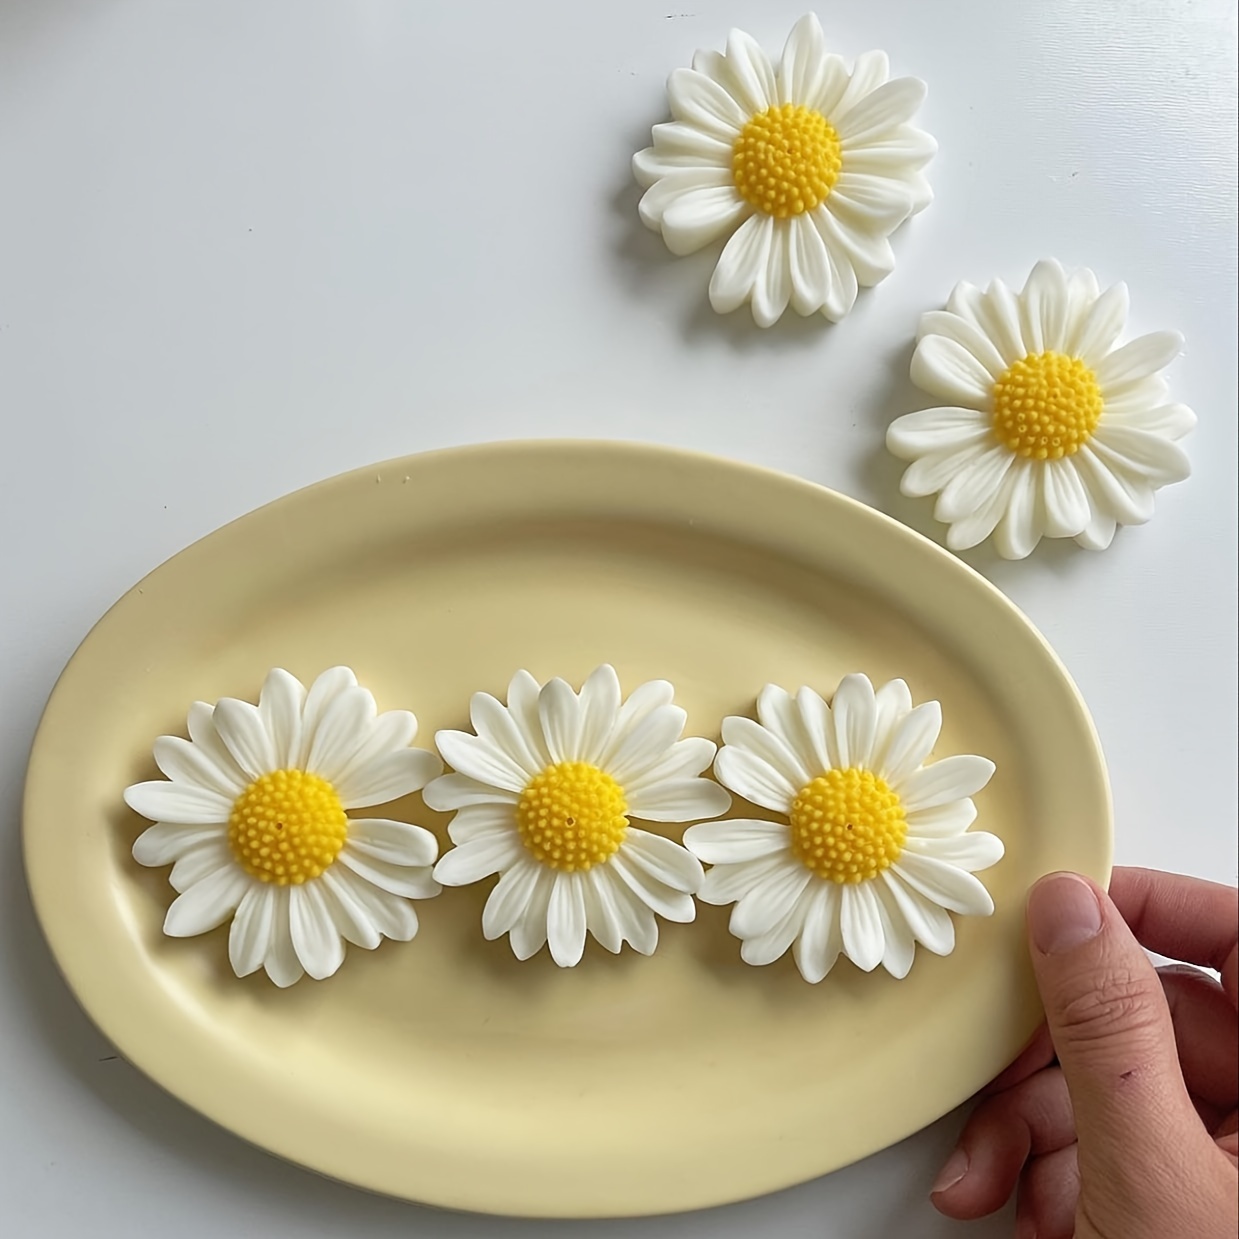 

1pc 3d Daisy Wild Chrysanthemum Flower Shape Silicone Mold For Diy Jewelry Casting, 3d Flower Shape Epoxy Resin Mold Daisy Making Craft Candle Mould Home Decor